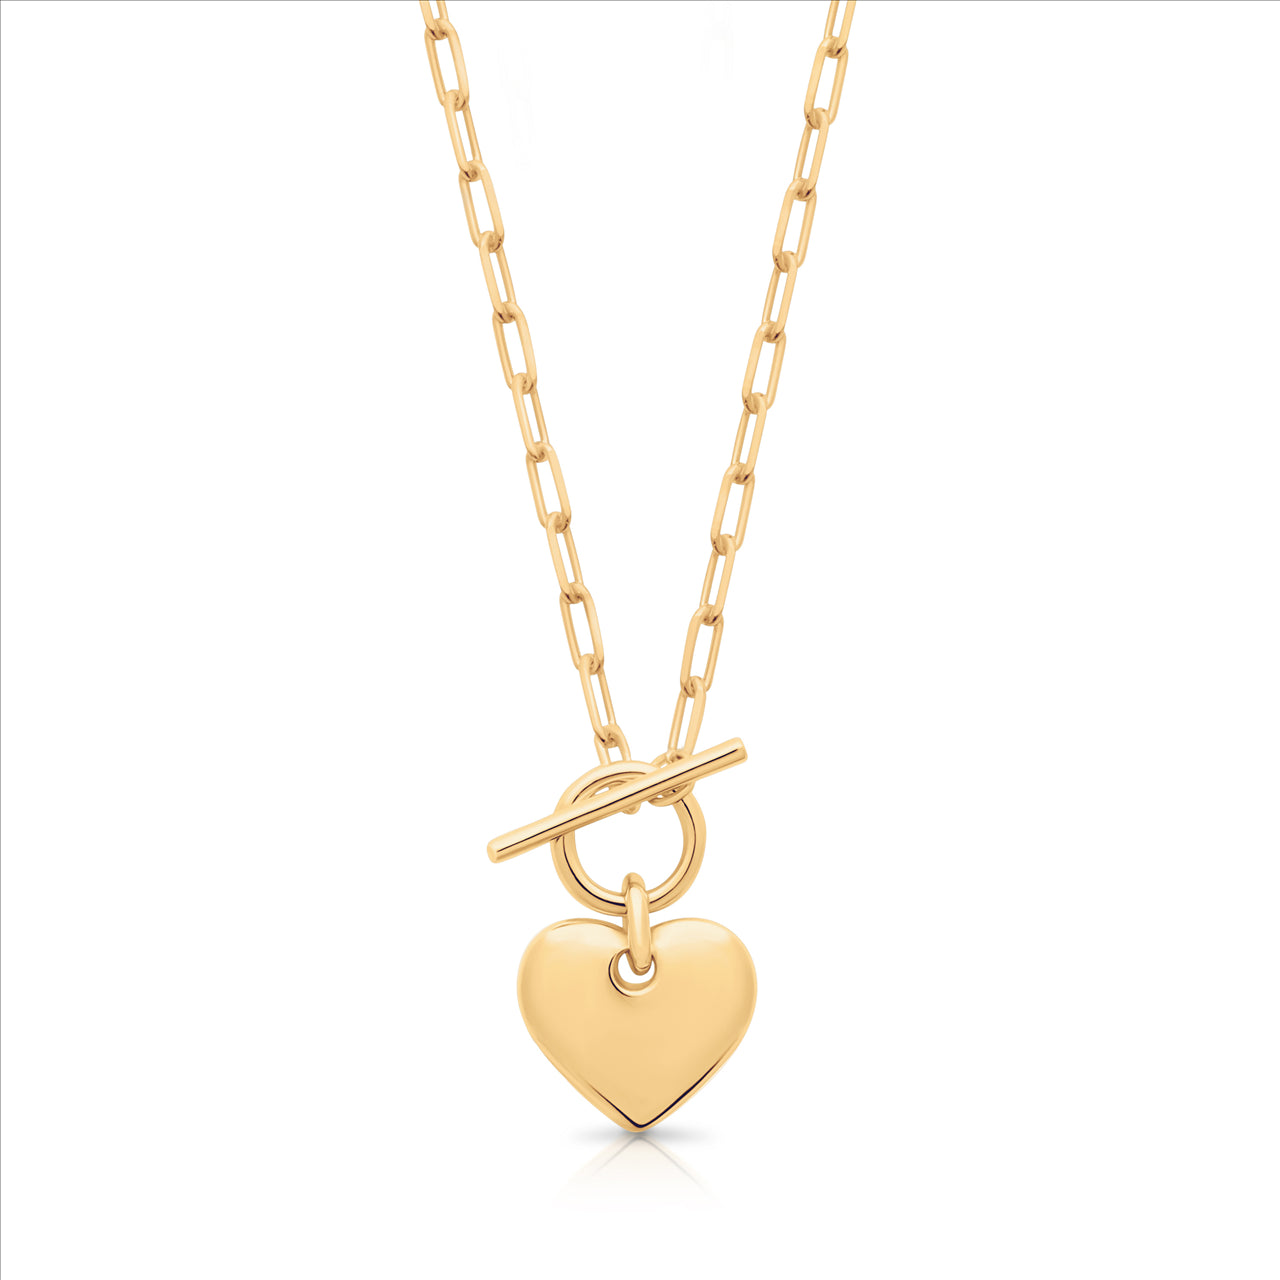 18ct Yellow Gold Plated Alloy Puff Heart Fob 45cm Necklace